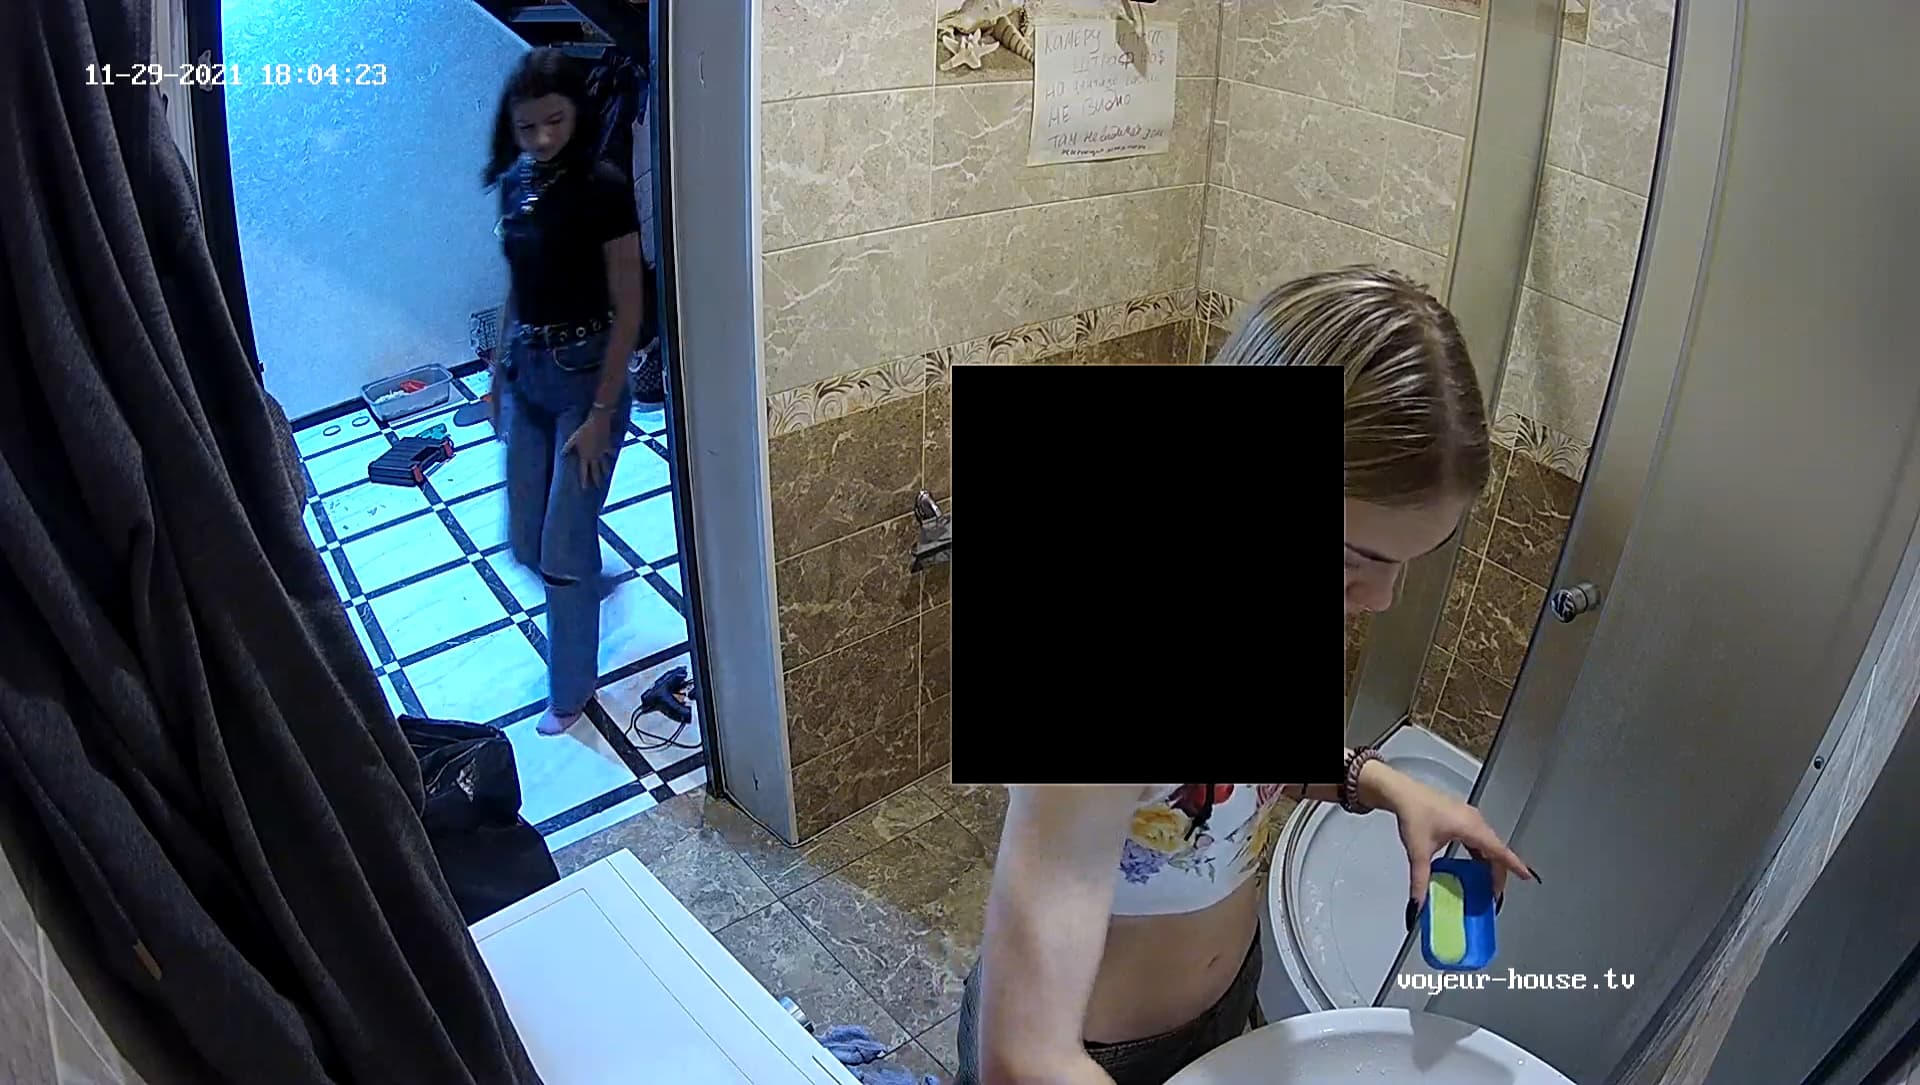 Should toilet cams be banned? - Your Feedback and Ideas pic